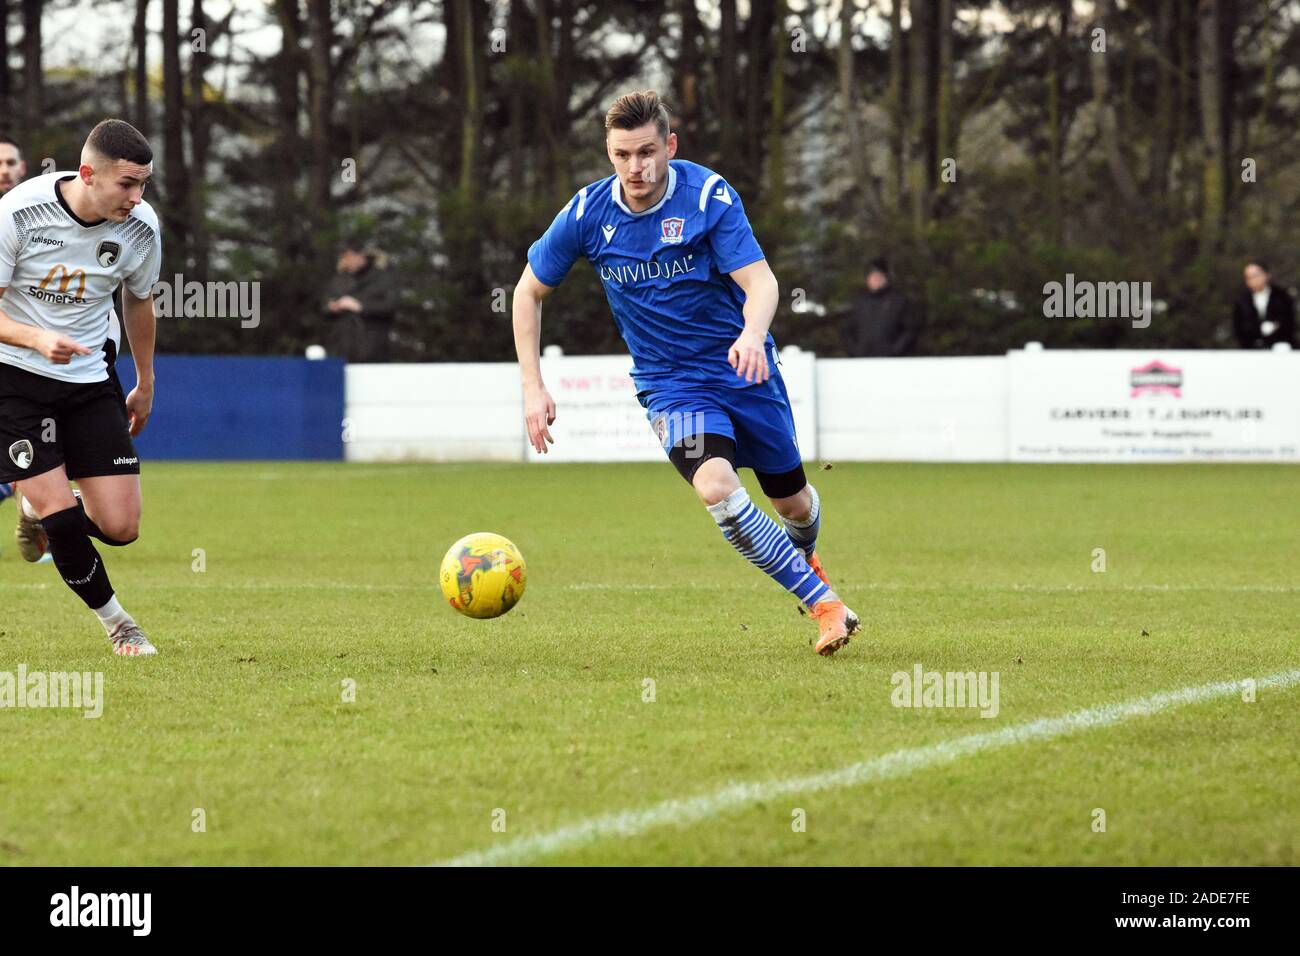 New loan signing Alex Henshall plays his first match on loan from Nuneaton football club playing for Swindon Supermarine football club Stock Photo